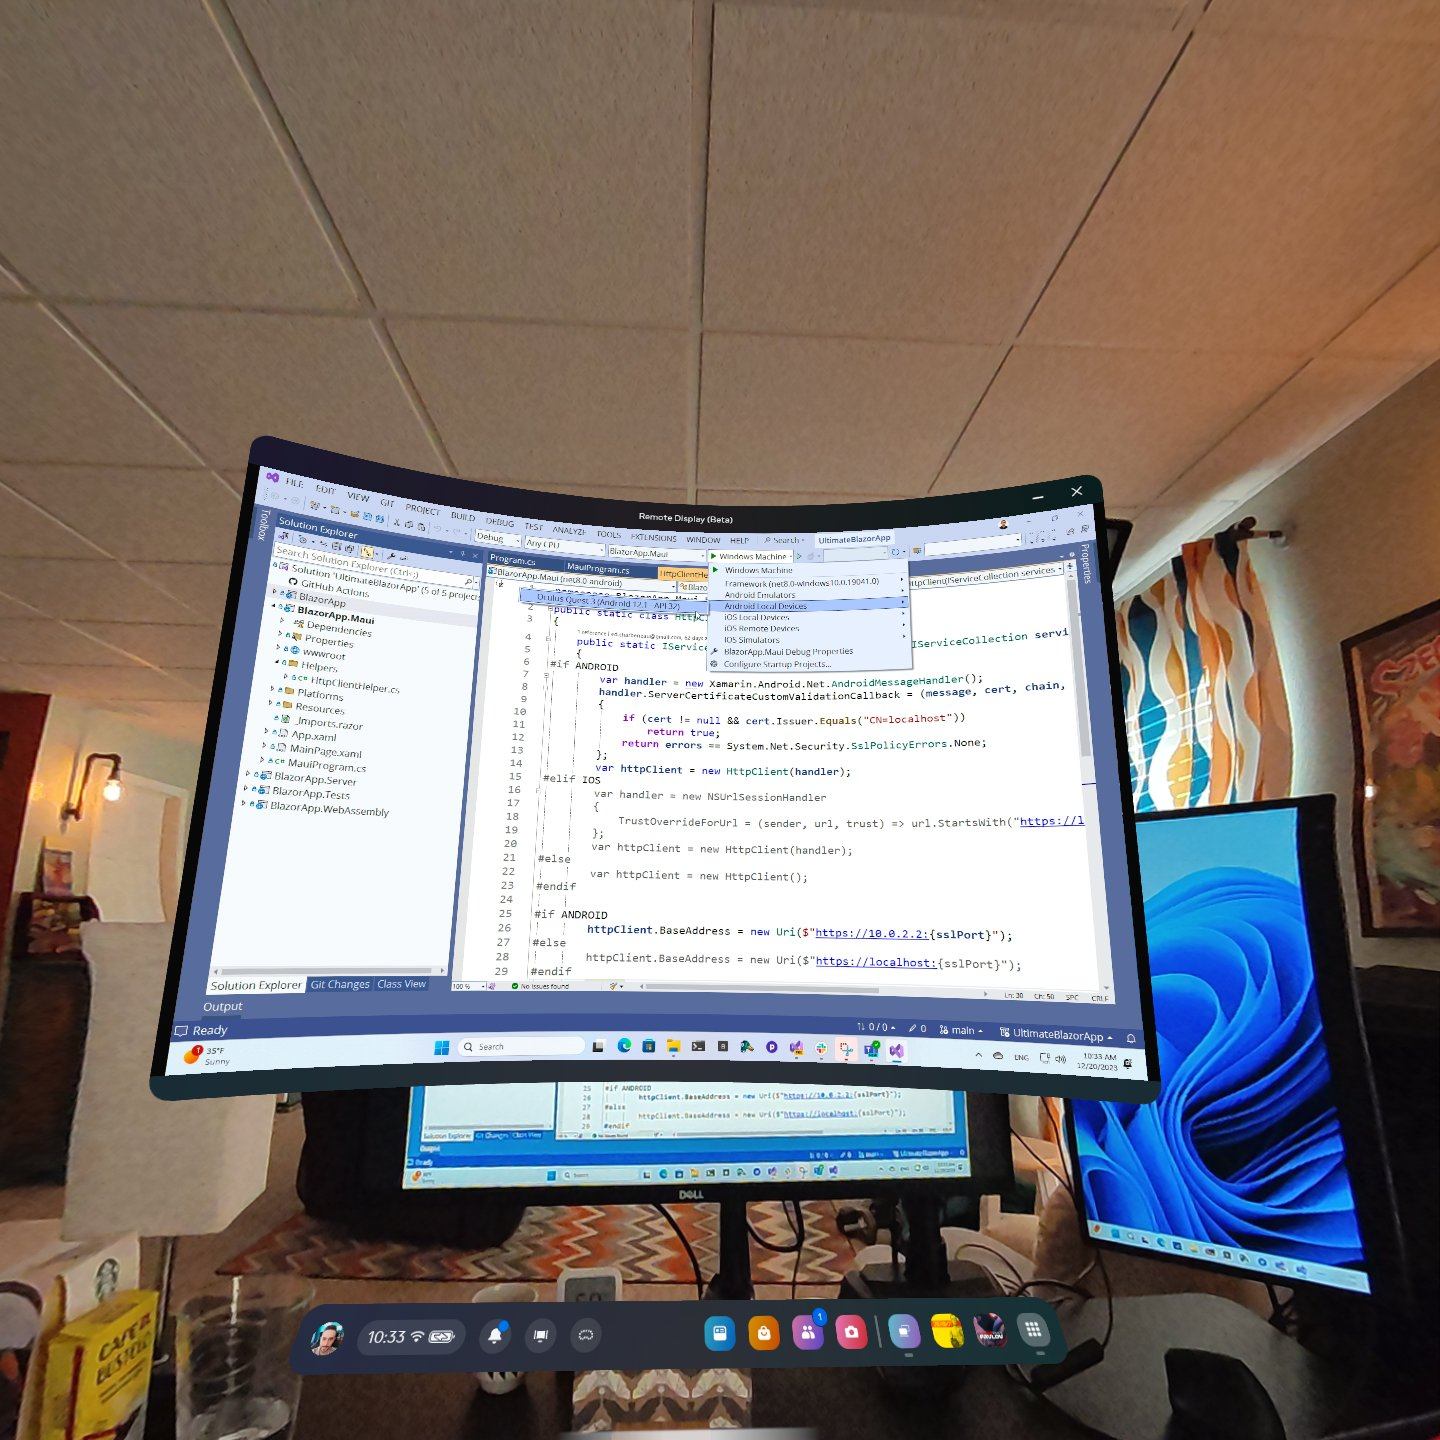 A real world office environment augmented by a virtual reality monitor. The virtual monitor shows Visual Studio with a deployment option for a Quest 3 device.